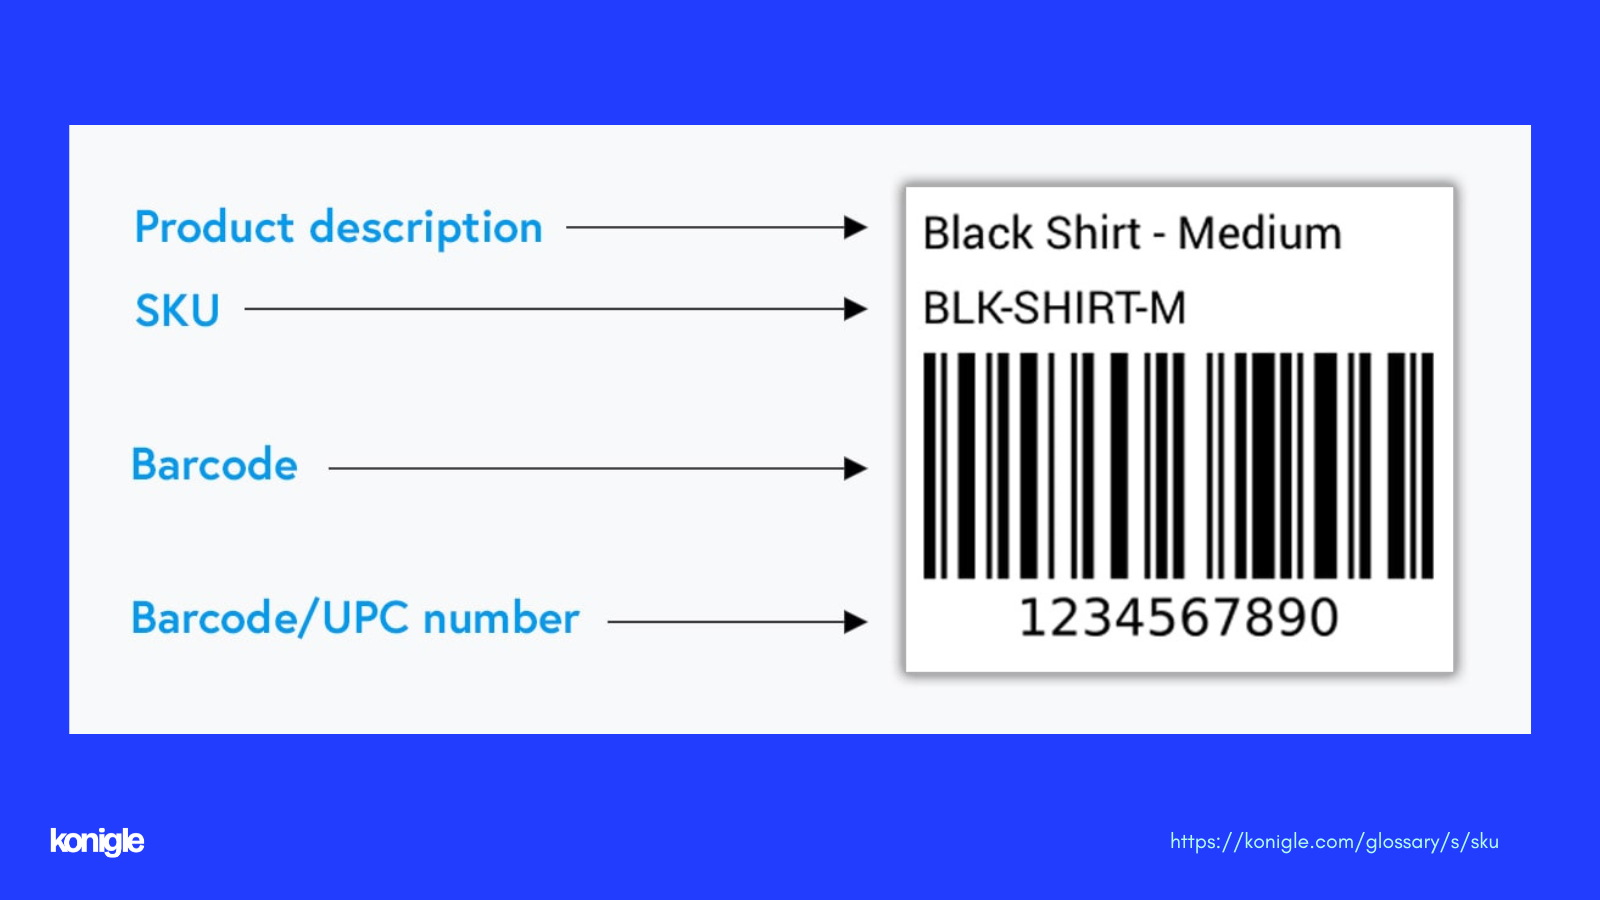 Stock-keeping unit number with barcode